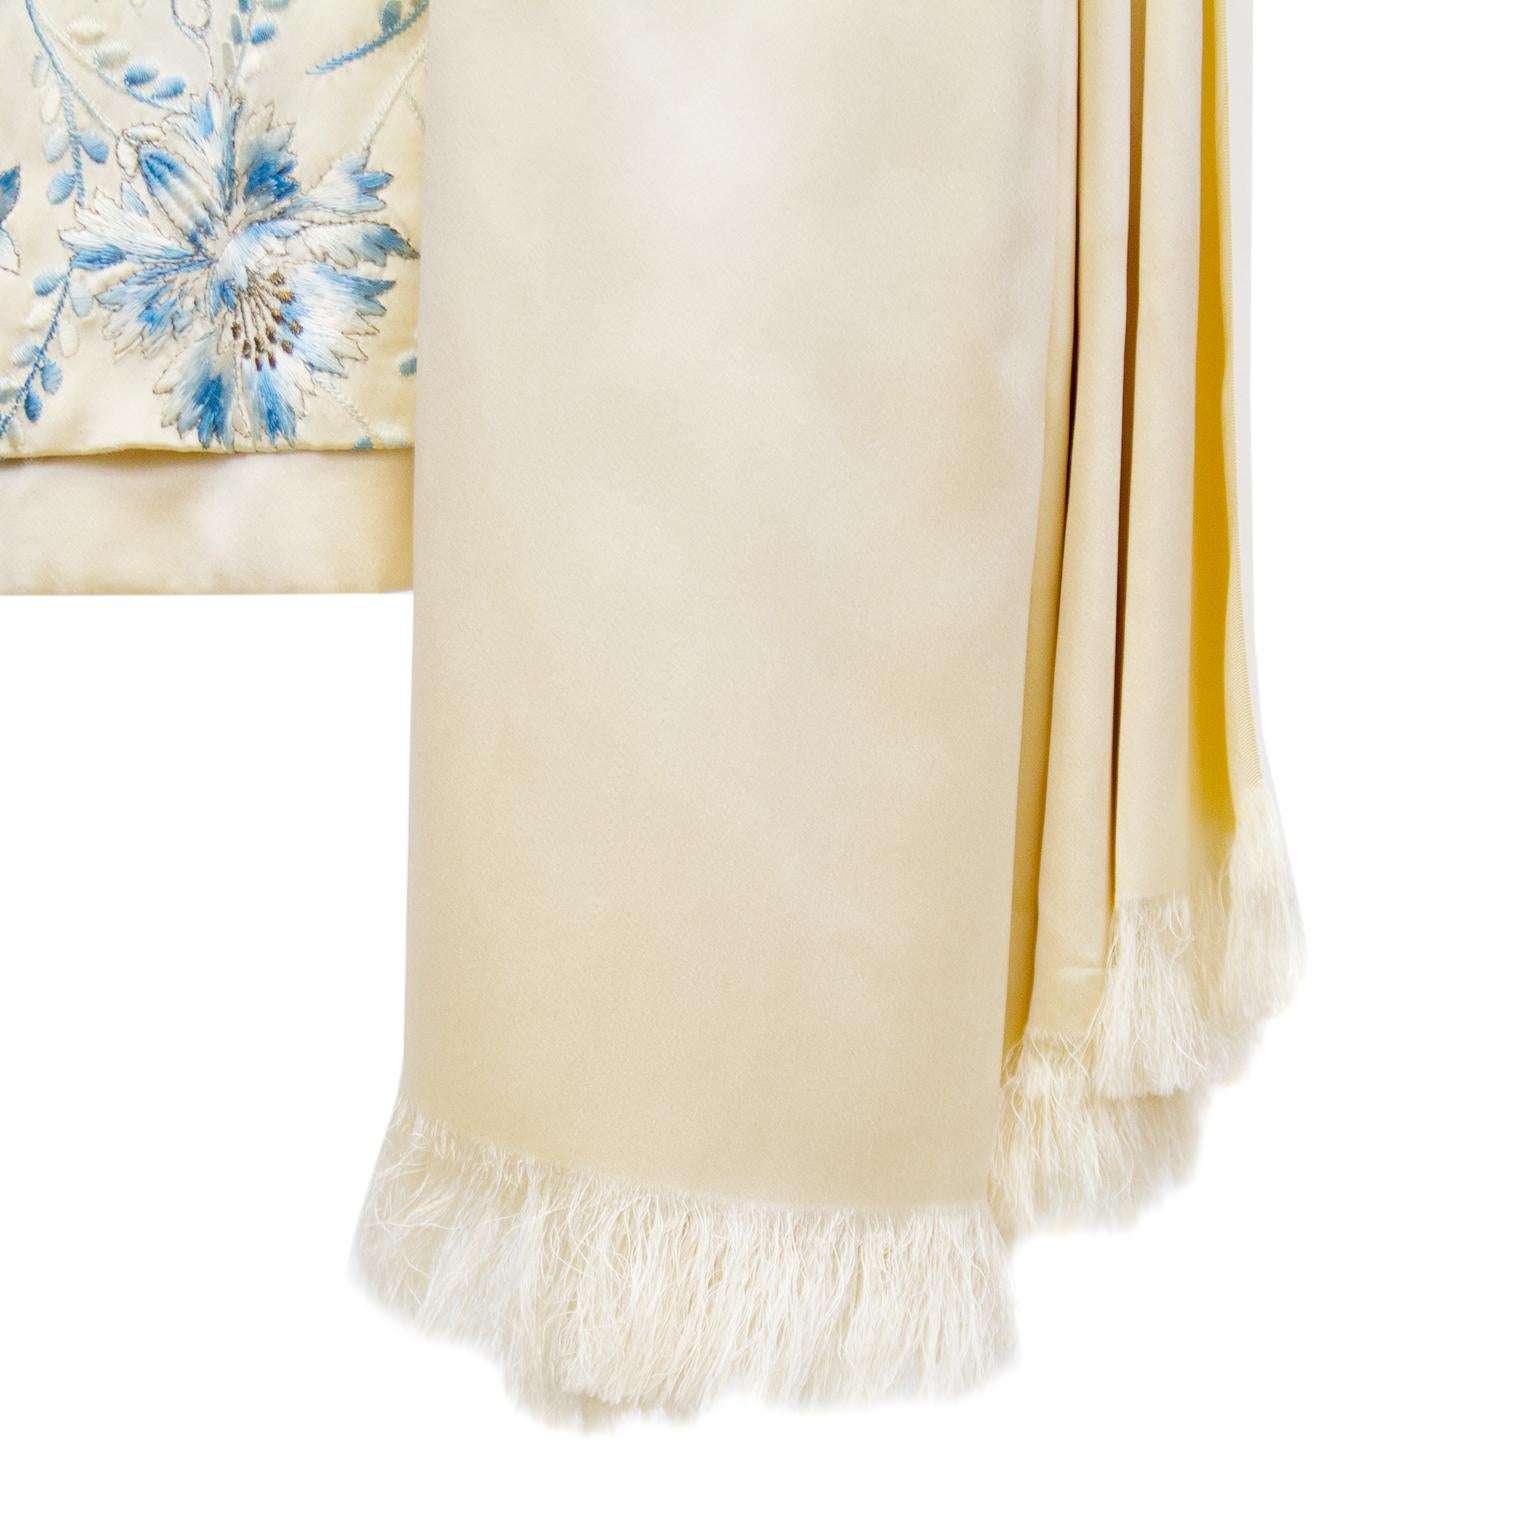 1960s Cream and Blue Floral Embroidered Satin Cocktail Dress 1